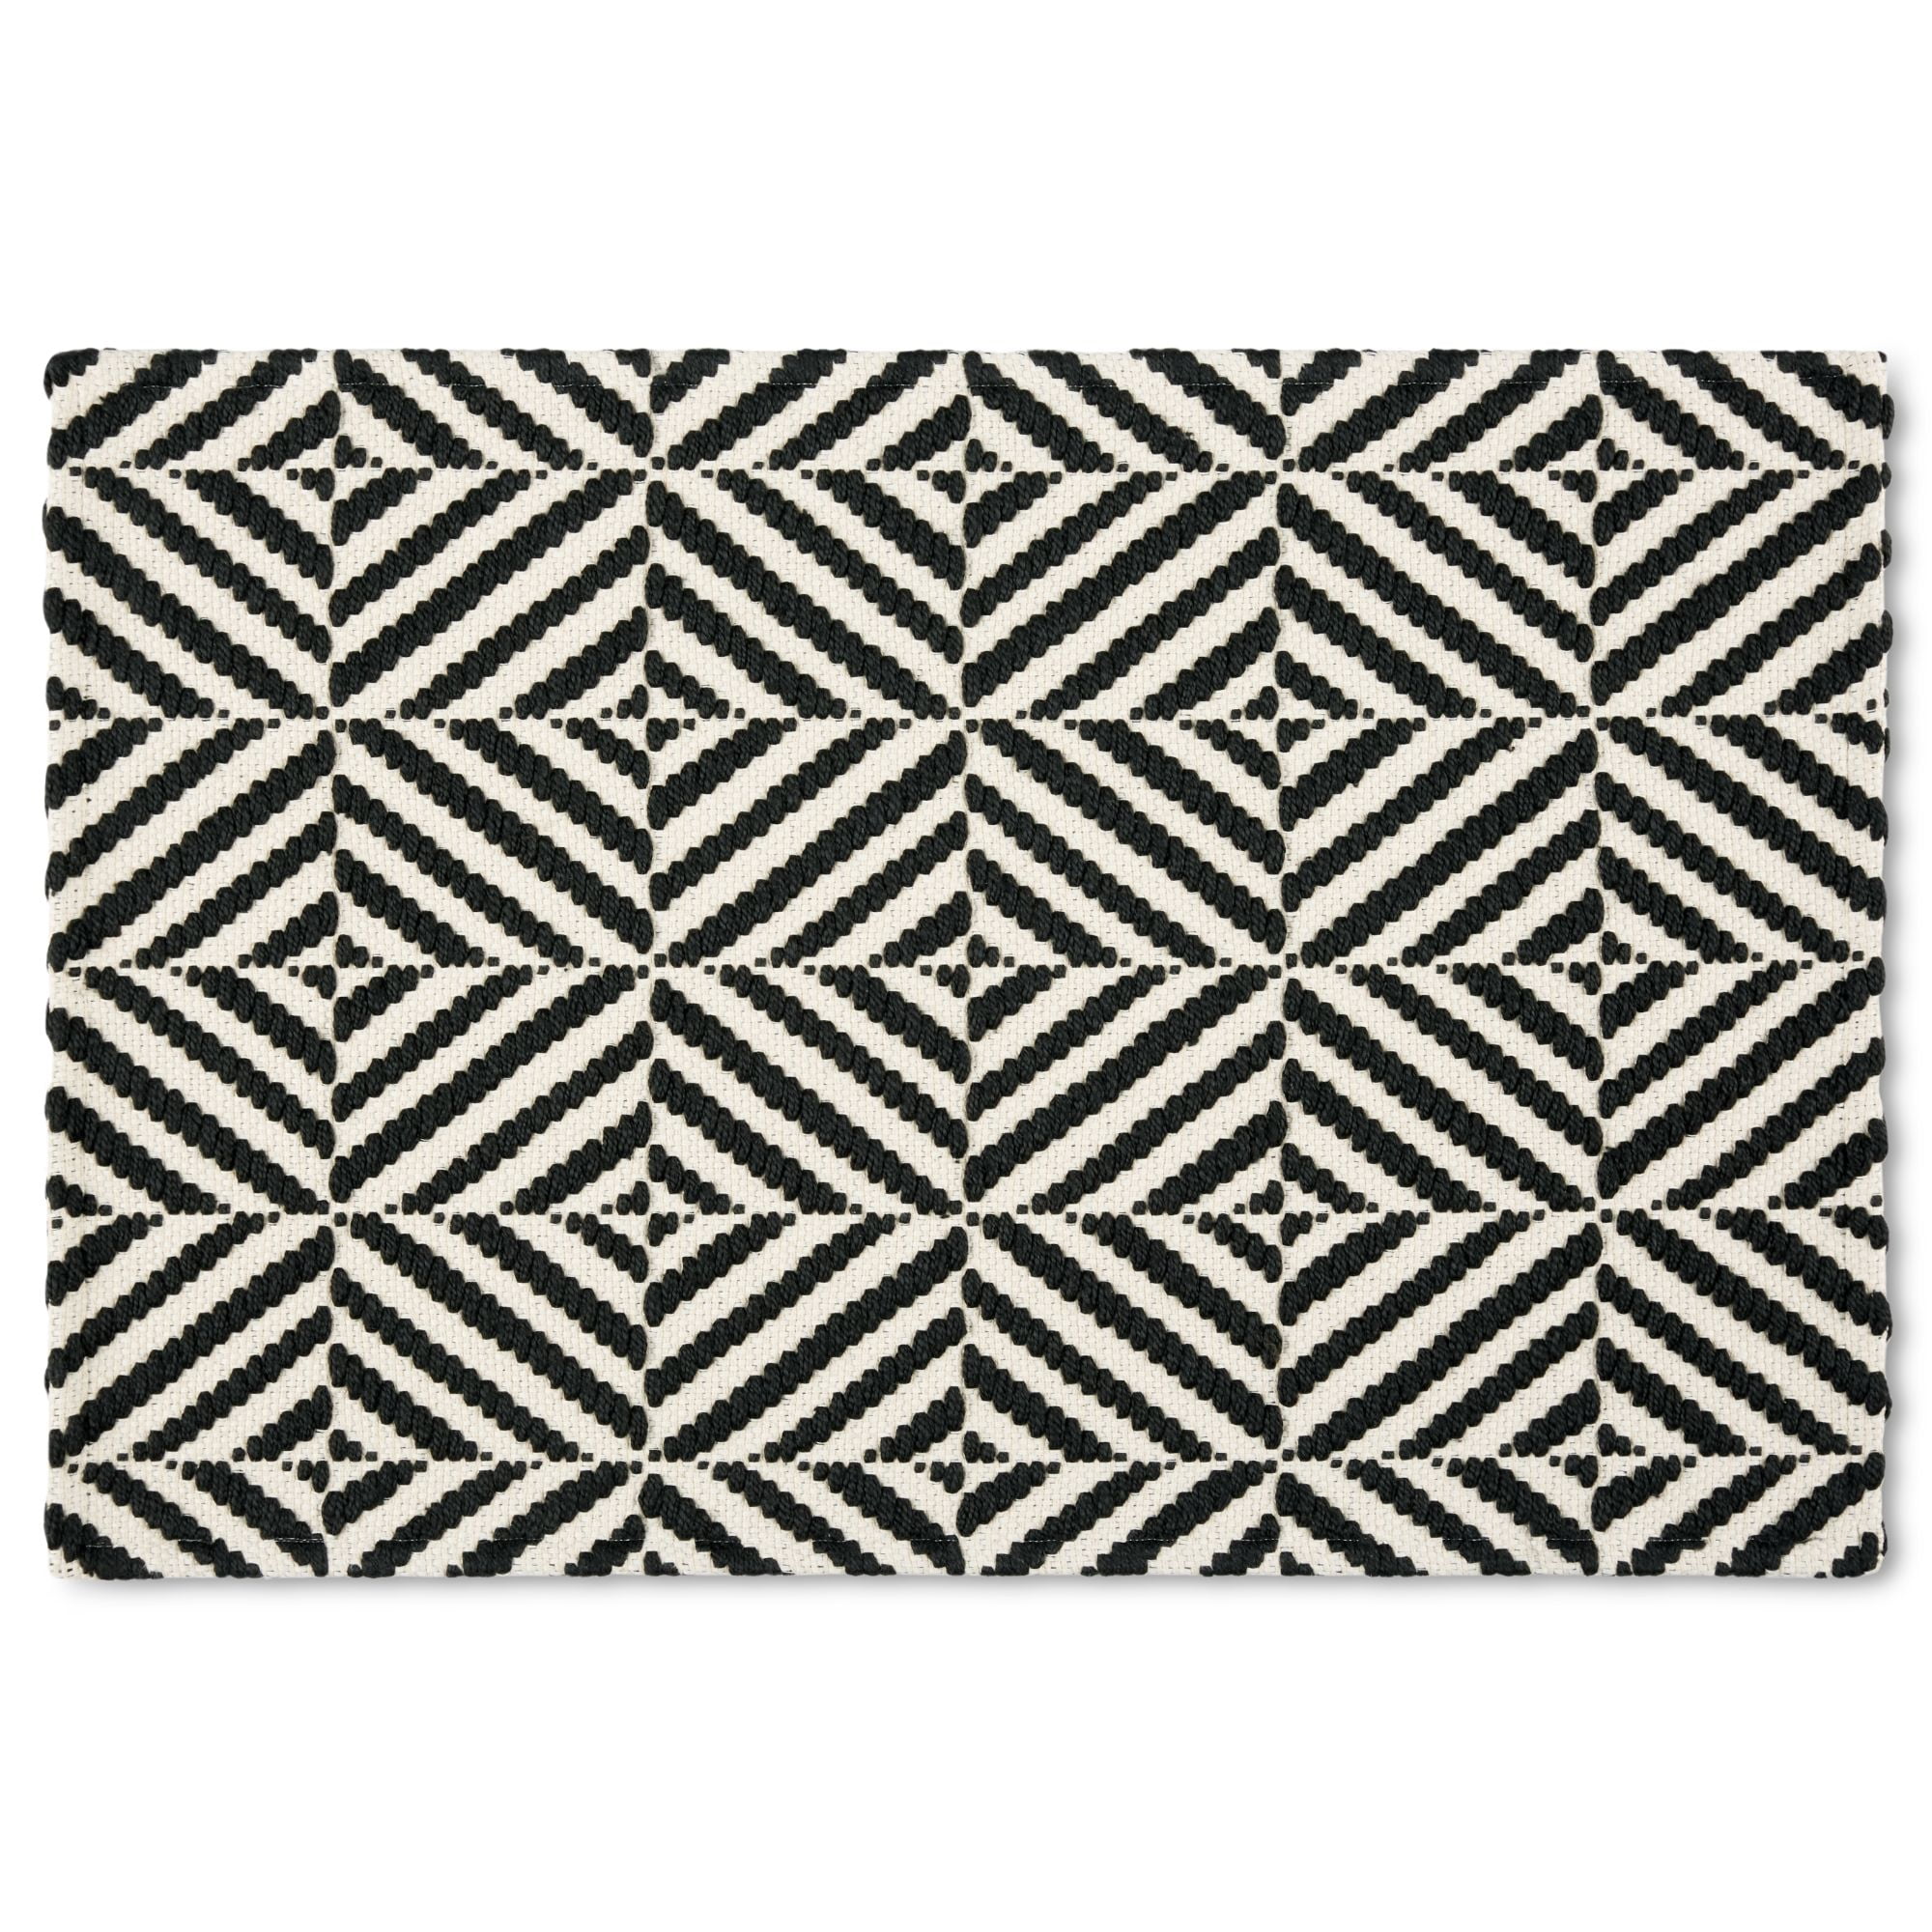 Mainstays Montana Woven Fabric Mat, 18"x27", Black, Available in Multiple Colors